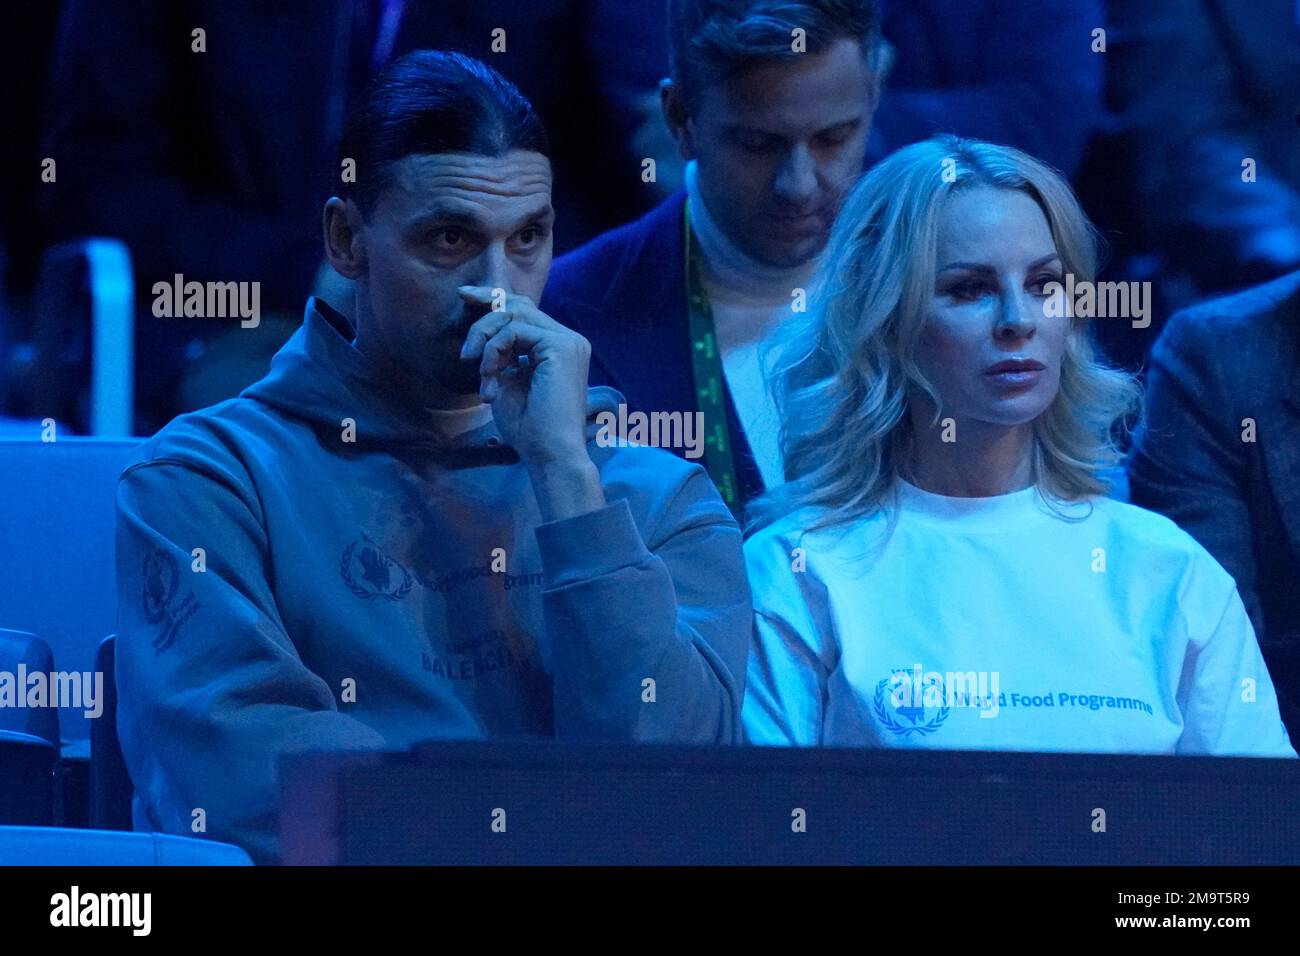 Swedish star soccer player Zlatan Ibrahimovic and his wife Helena Seger watch the singles final tennis match of the ATP World Tour Finals between Serbias Novak Djokovic and Norways Casper Ruud at